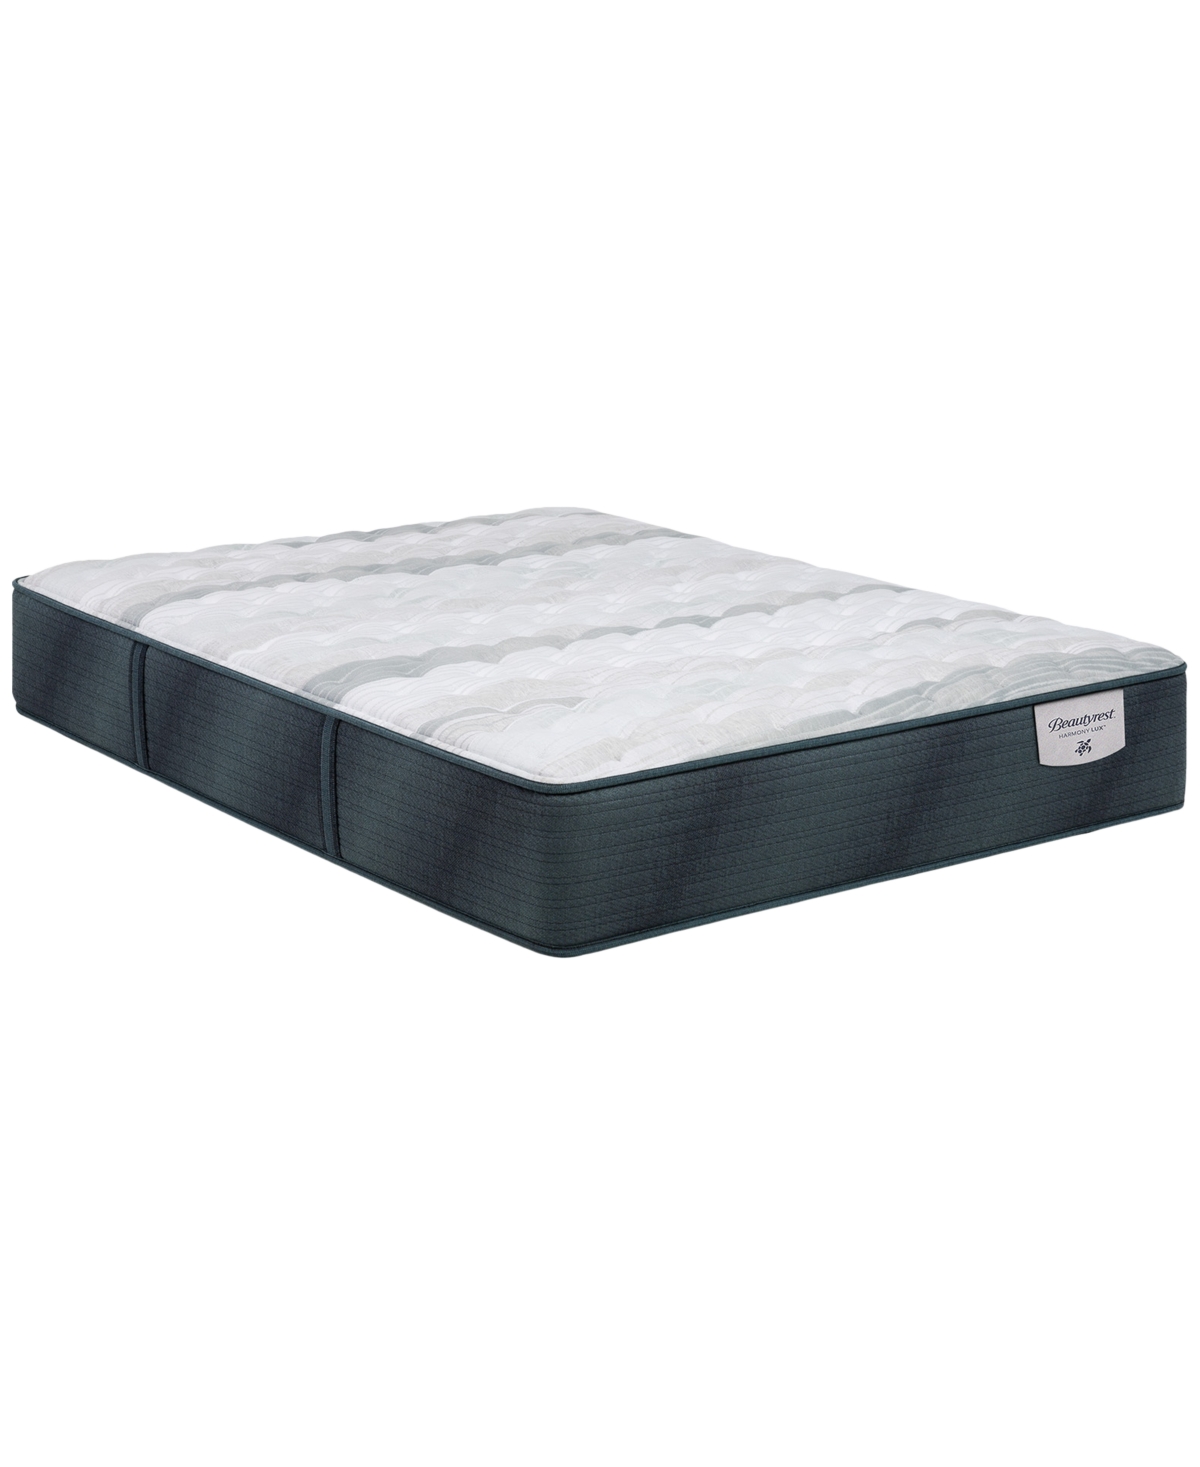 Beautyrest Harmony Lux Anchor Island 12.5" Firm Mattress In No Color